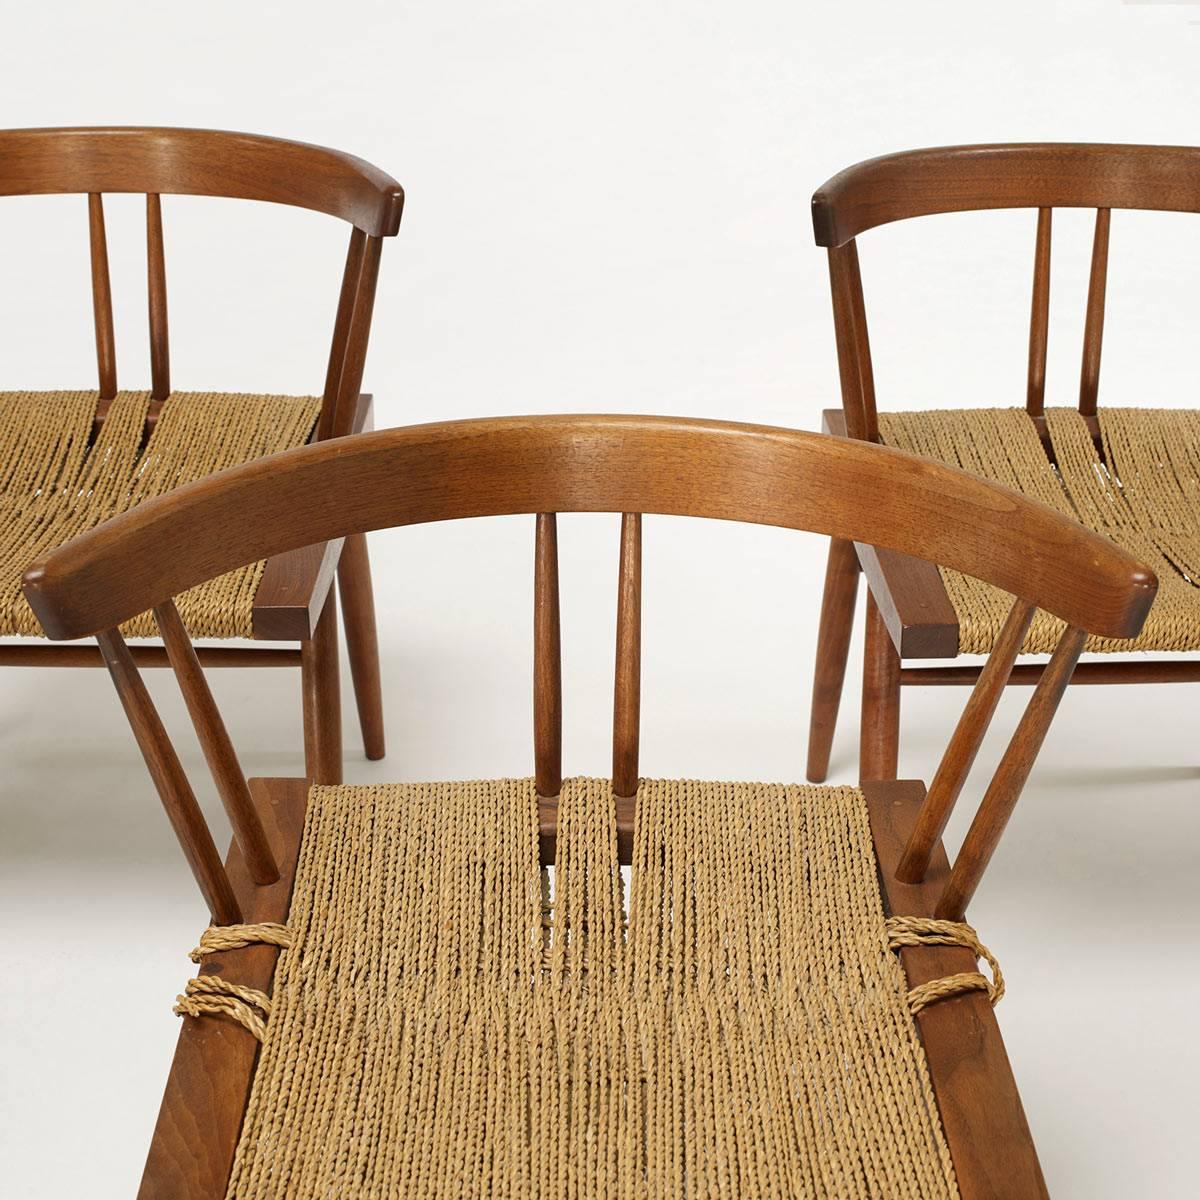 George Nakashima woven grass rope seat chairs with walnut frames. New Hope, PA, 1957/67.
Good vintage condition.